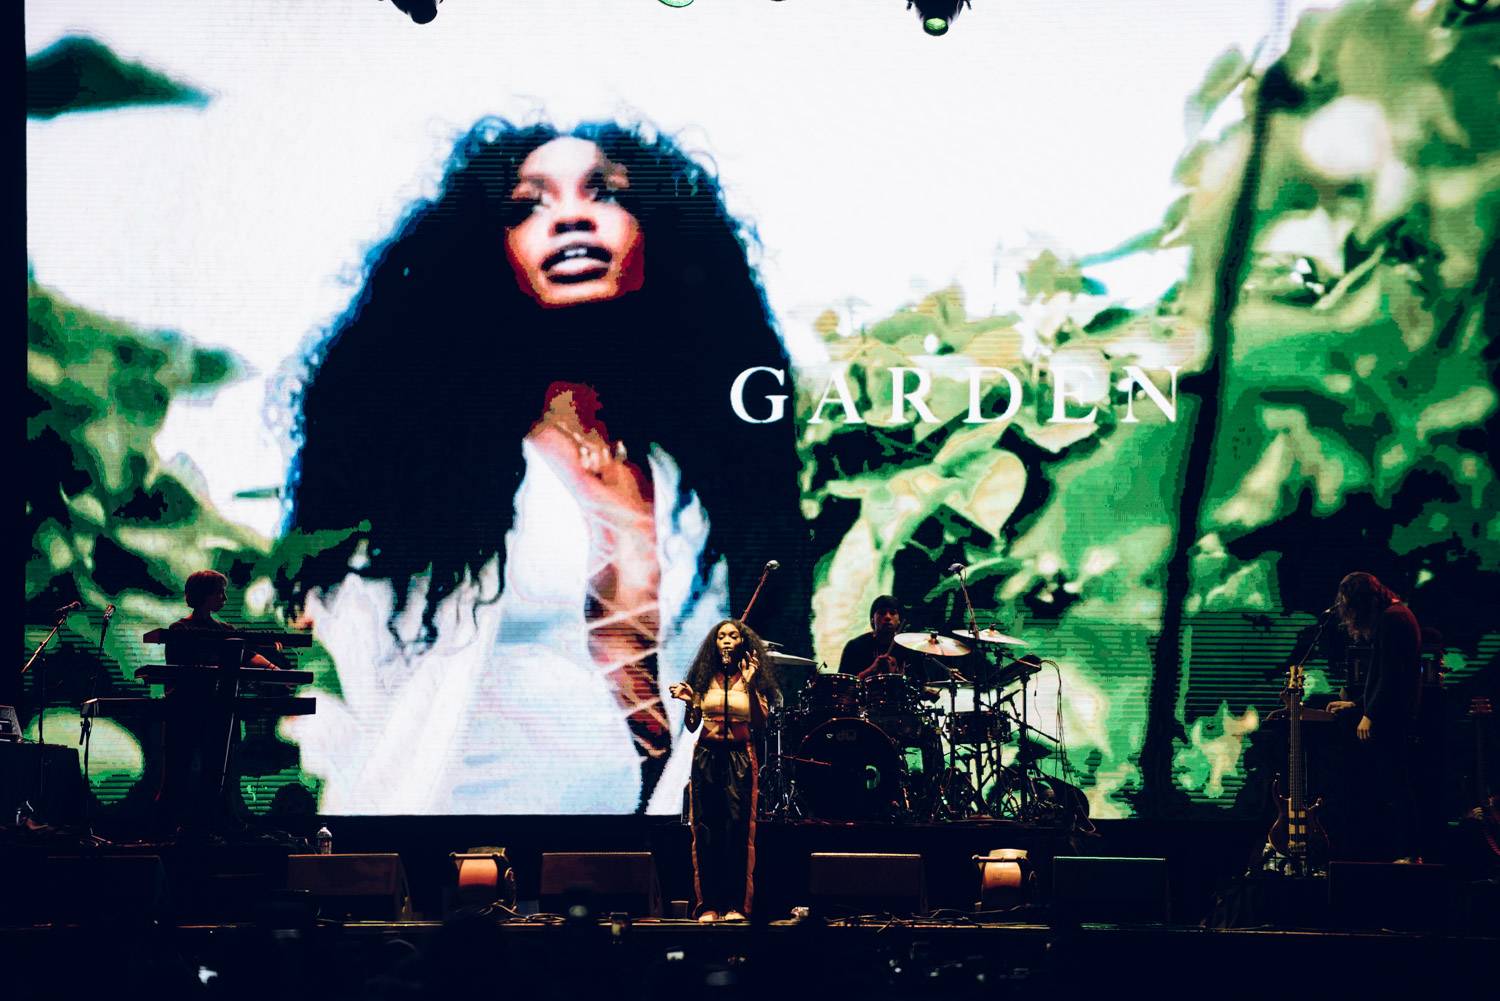 SZA at the Bumbershoot Music Festival 2018 - Day 3. Sept 2 2018. Pavel Boiko photo.